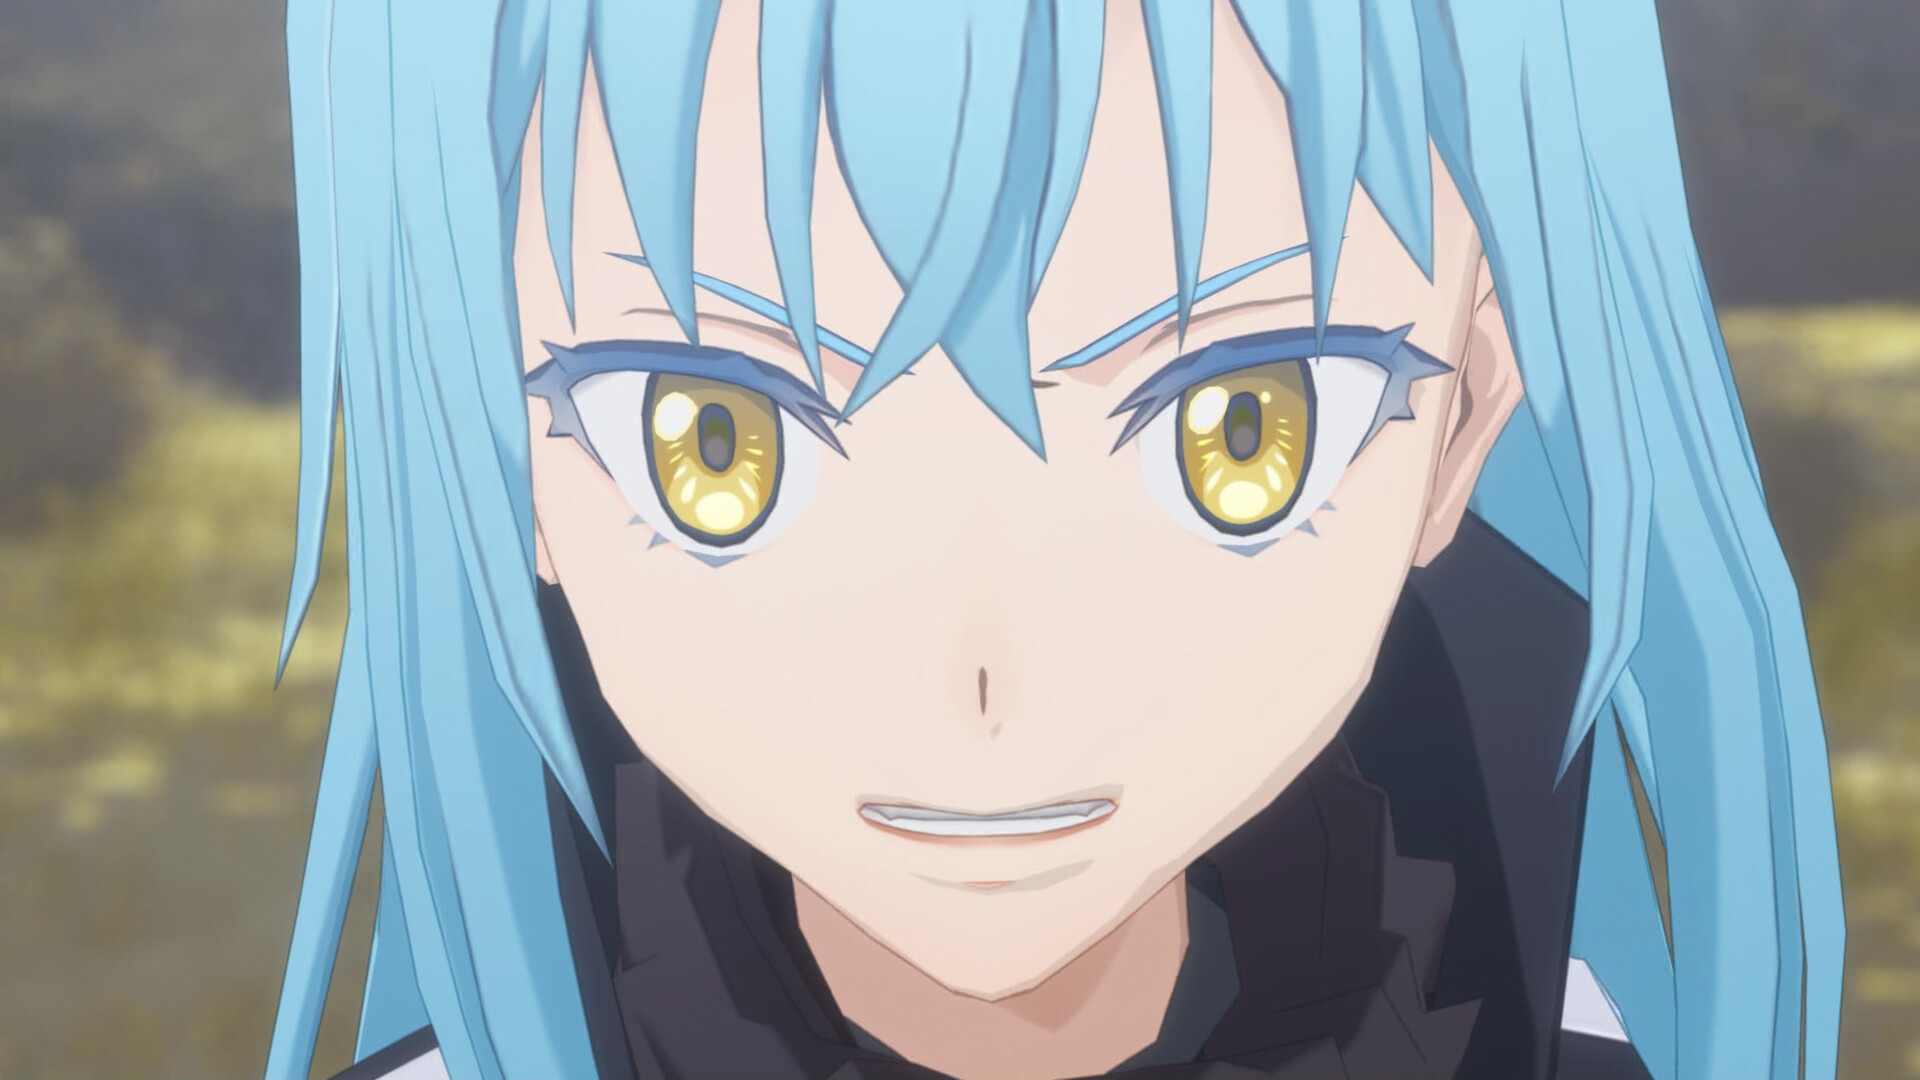 That Time I Got Reincarnated as a Slime starts pre orders